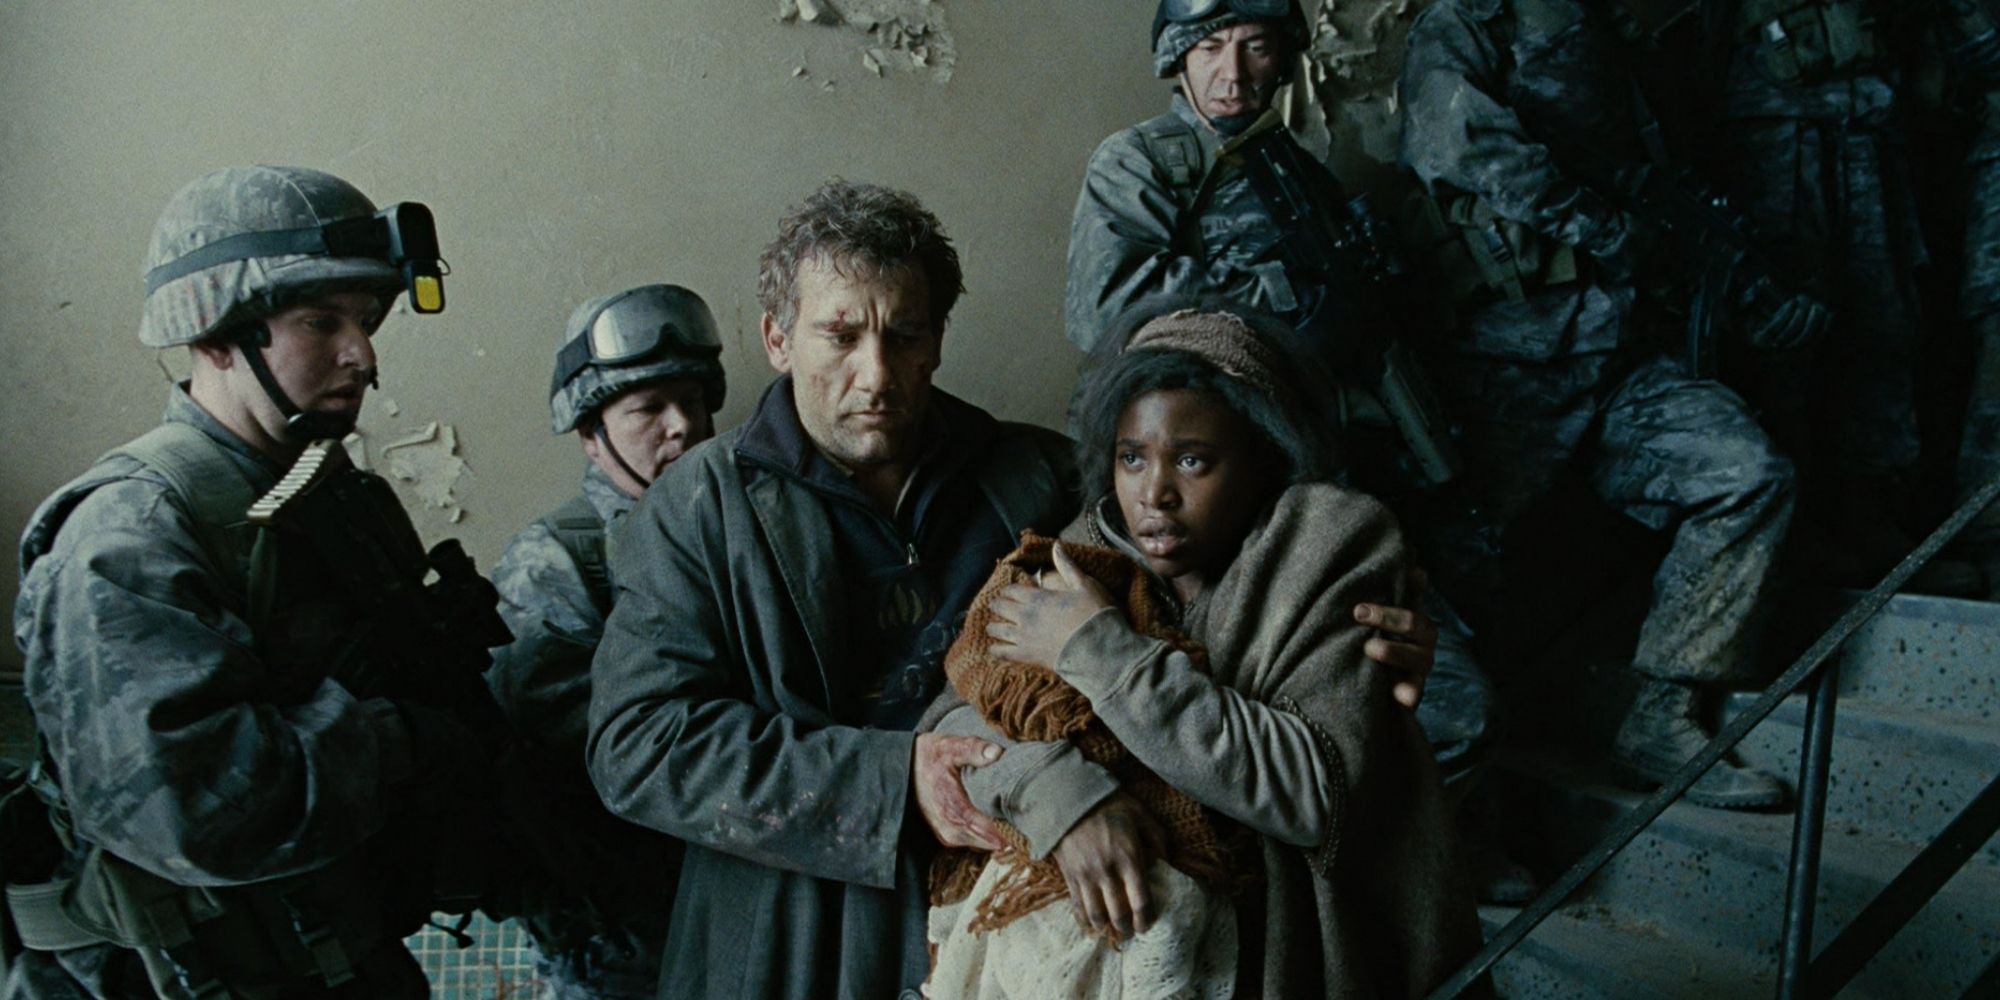 Theo (Clive Owen) accompanies Kee (Clare-Hope Ashitey) and their newborn baby